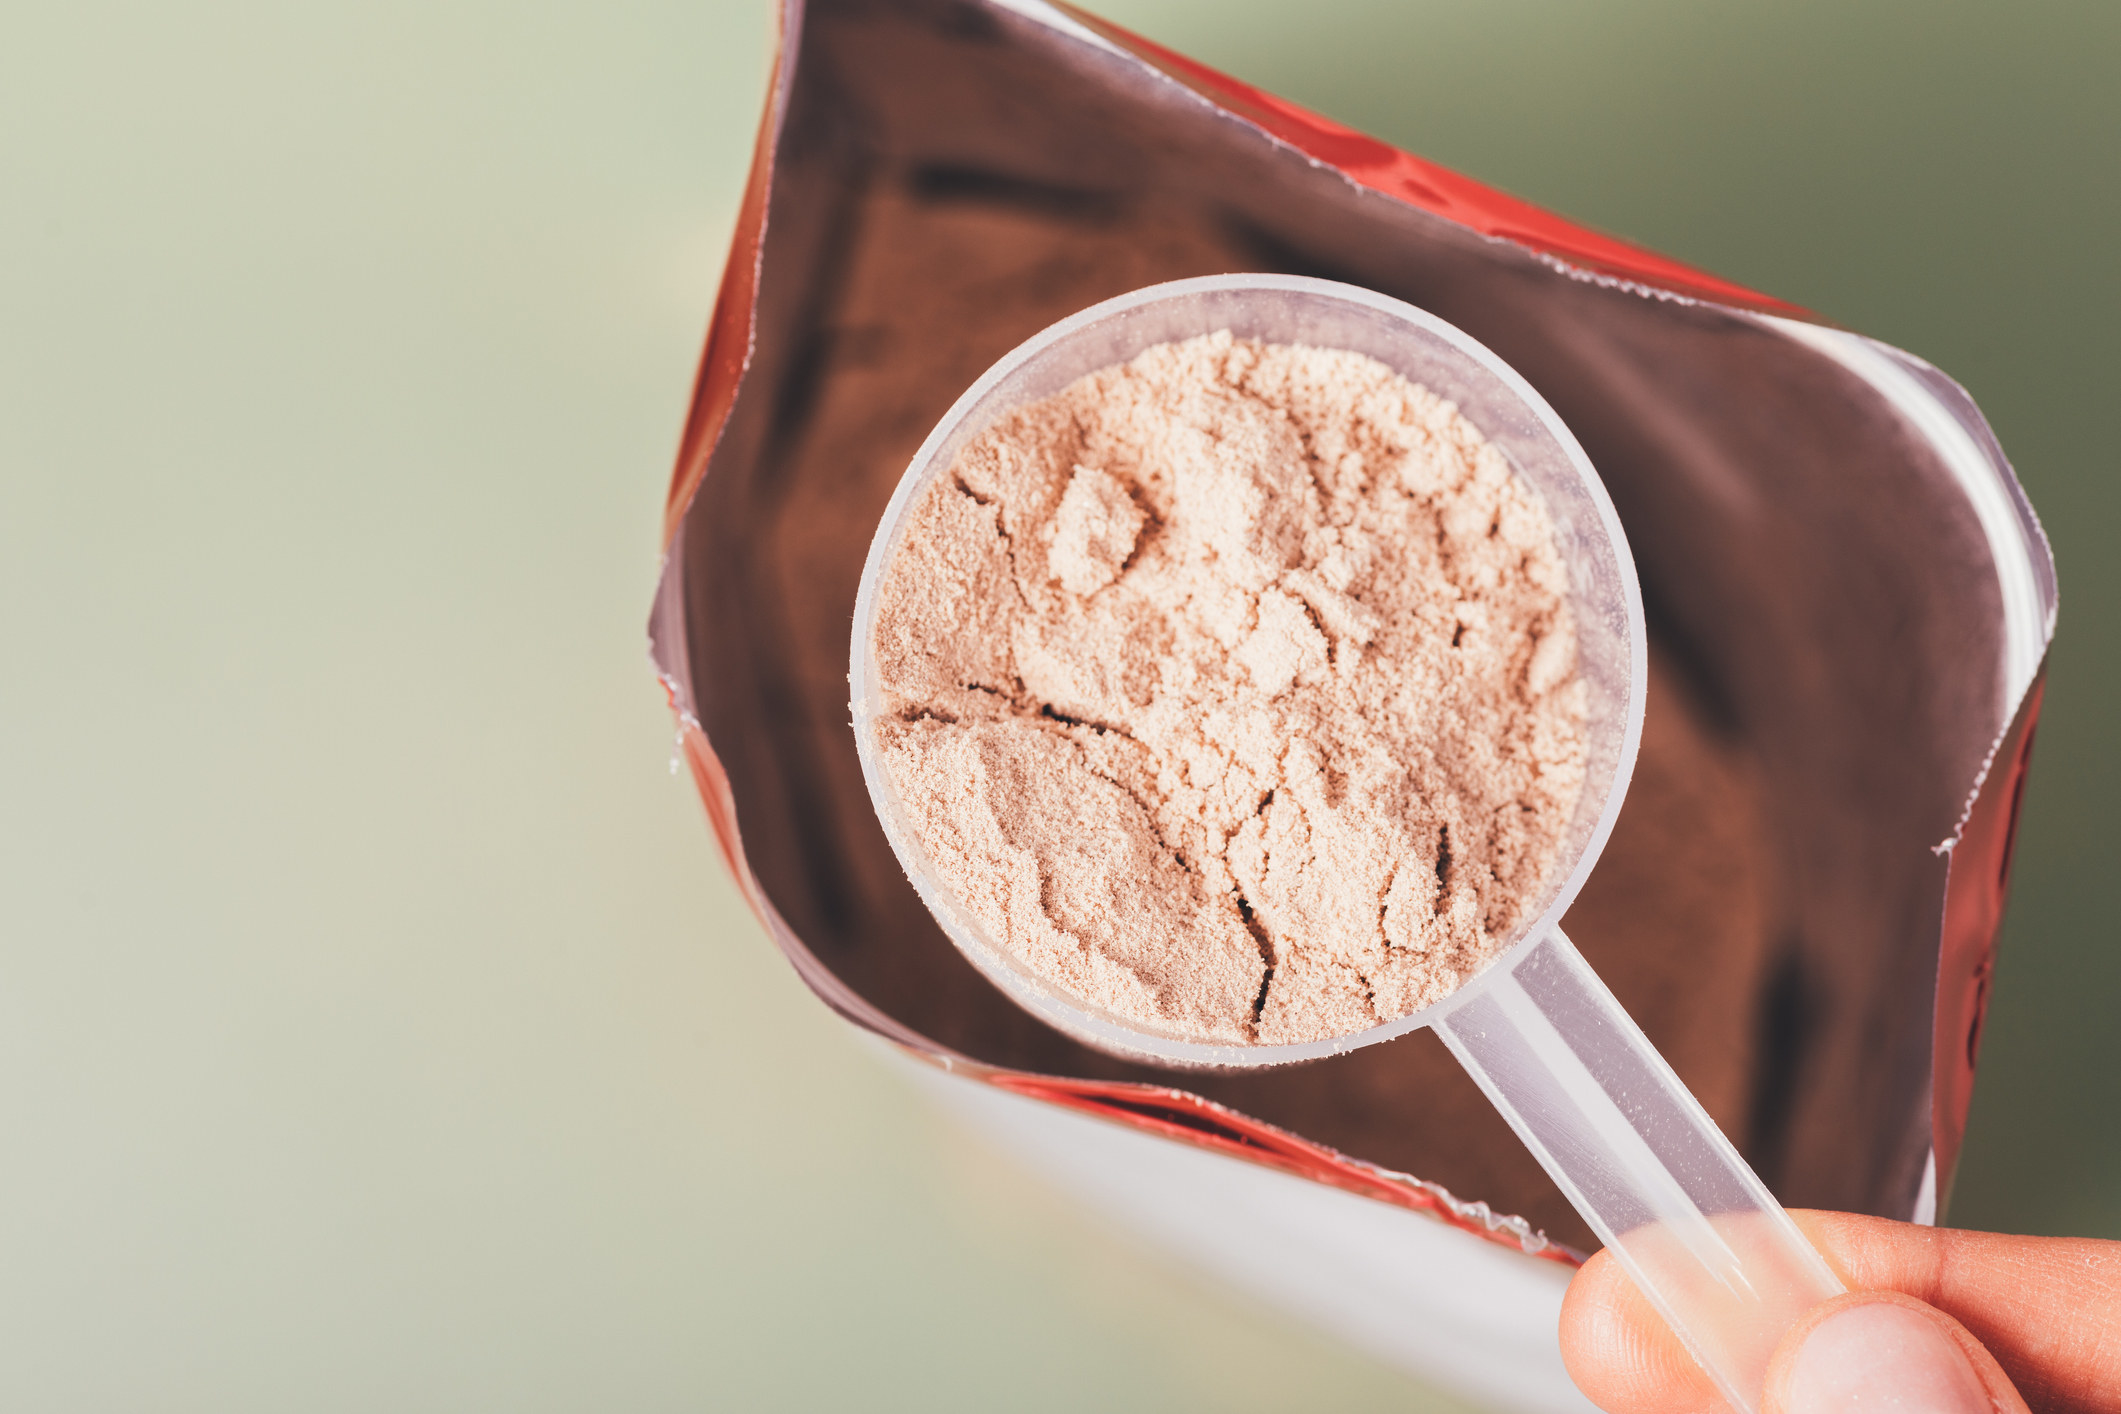 Measuring protein powder with a spoon.